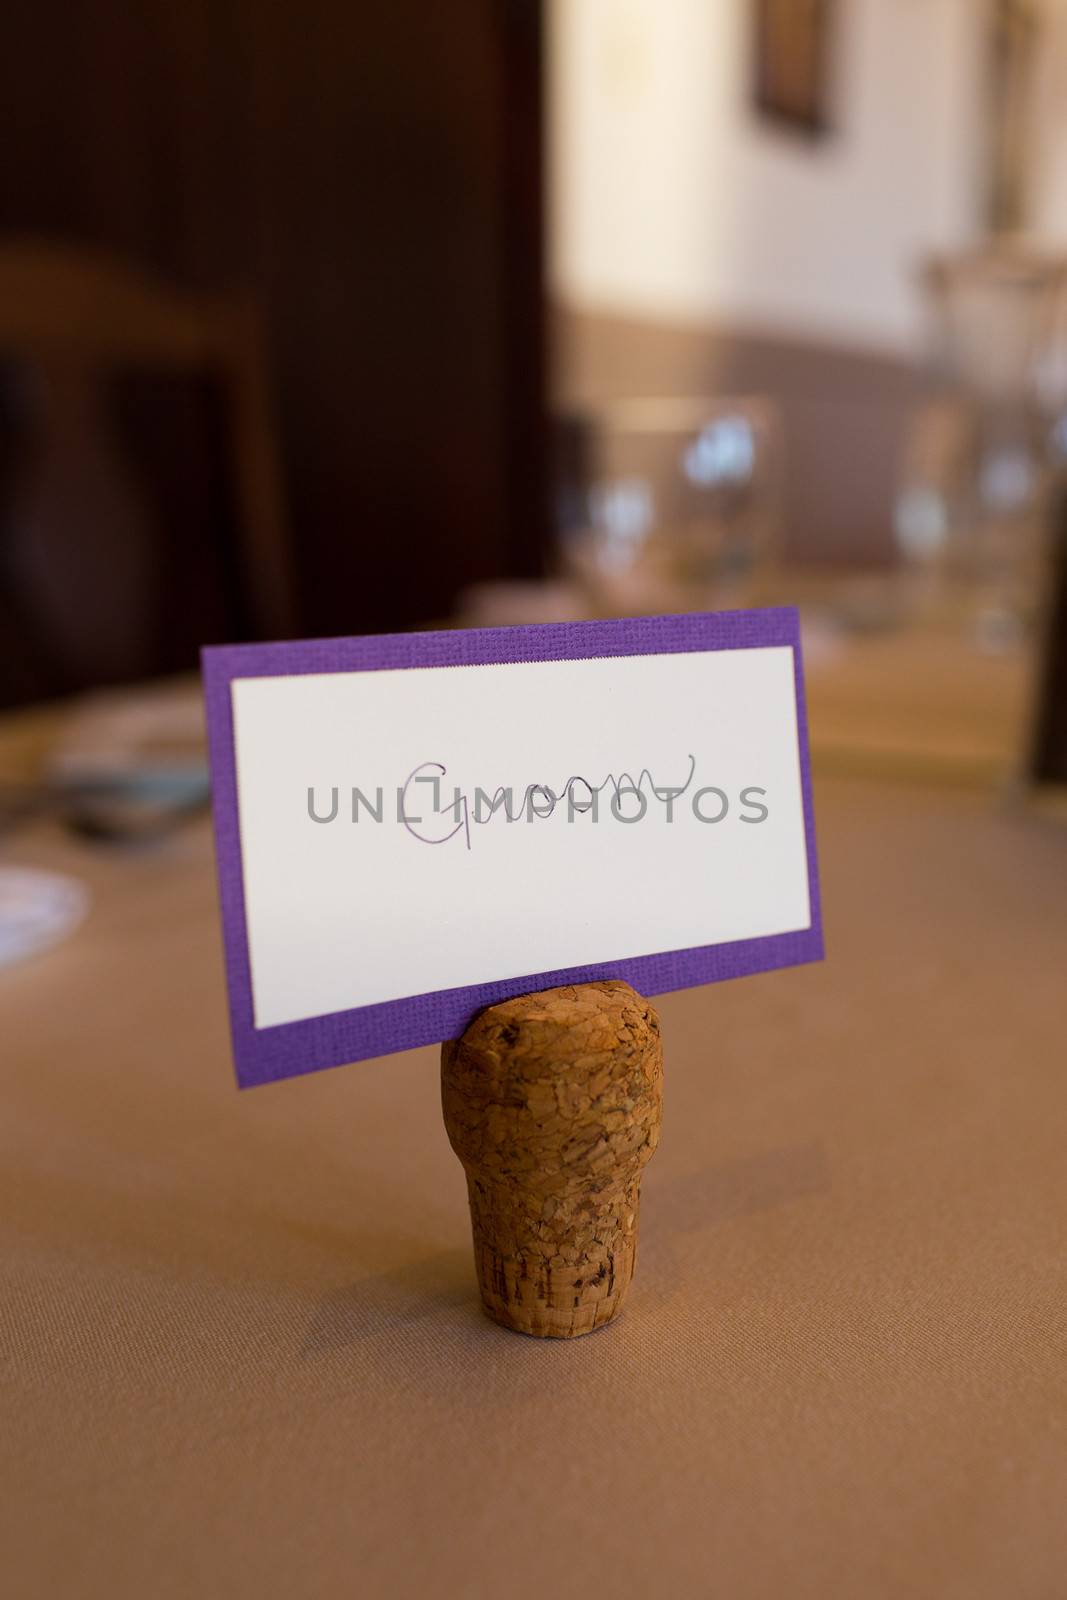 A small sign says groom standing up using a champagne cork as a stand.